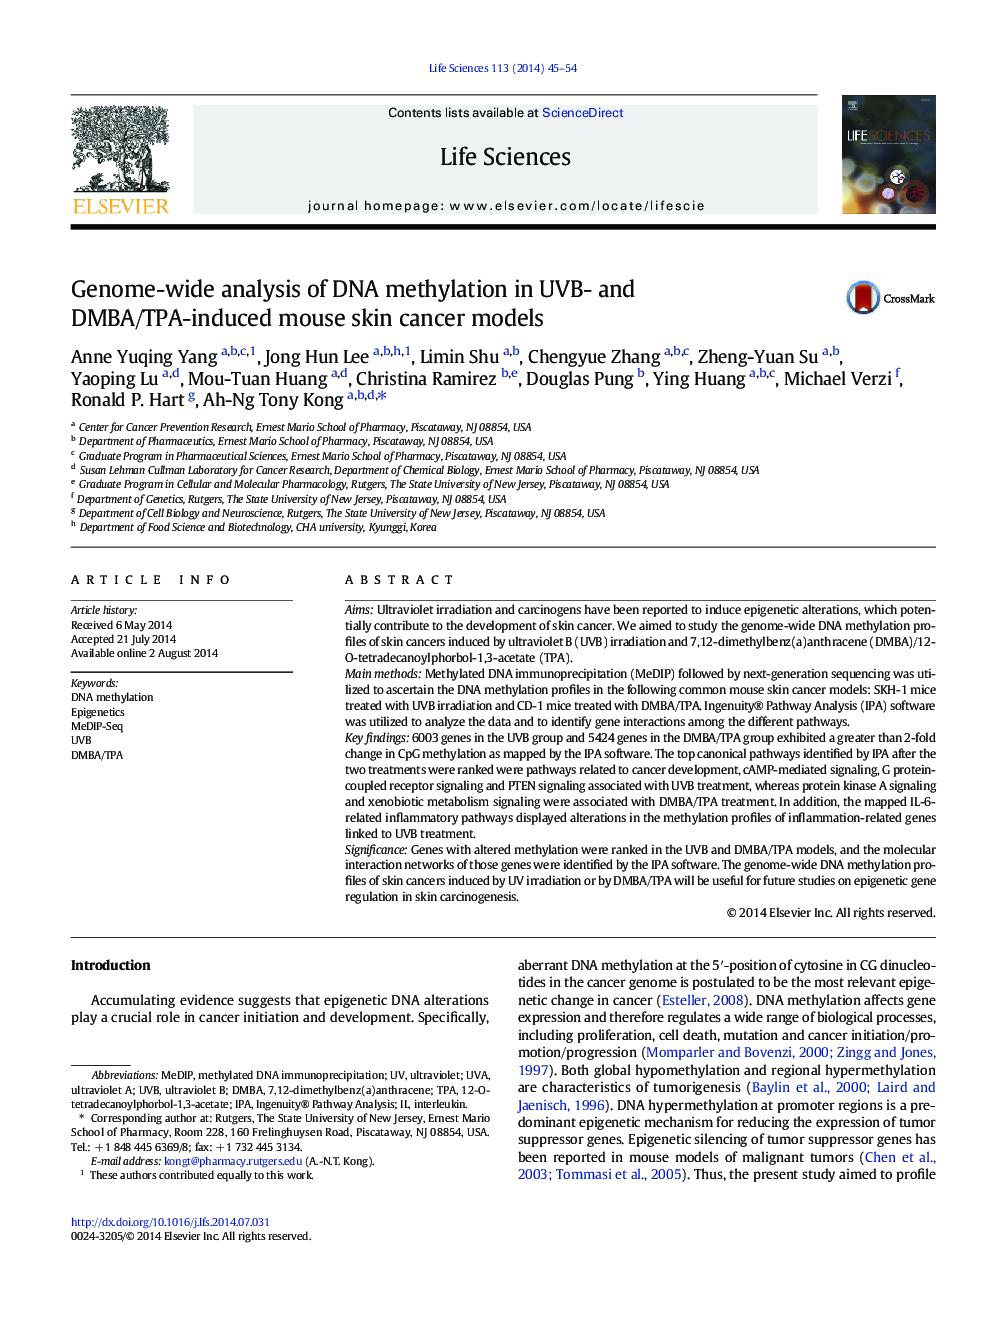 Genome-wide analysis of DNA methylation in UVB- and DMBA/TPA-induced mouse skin cancer models